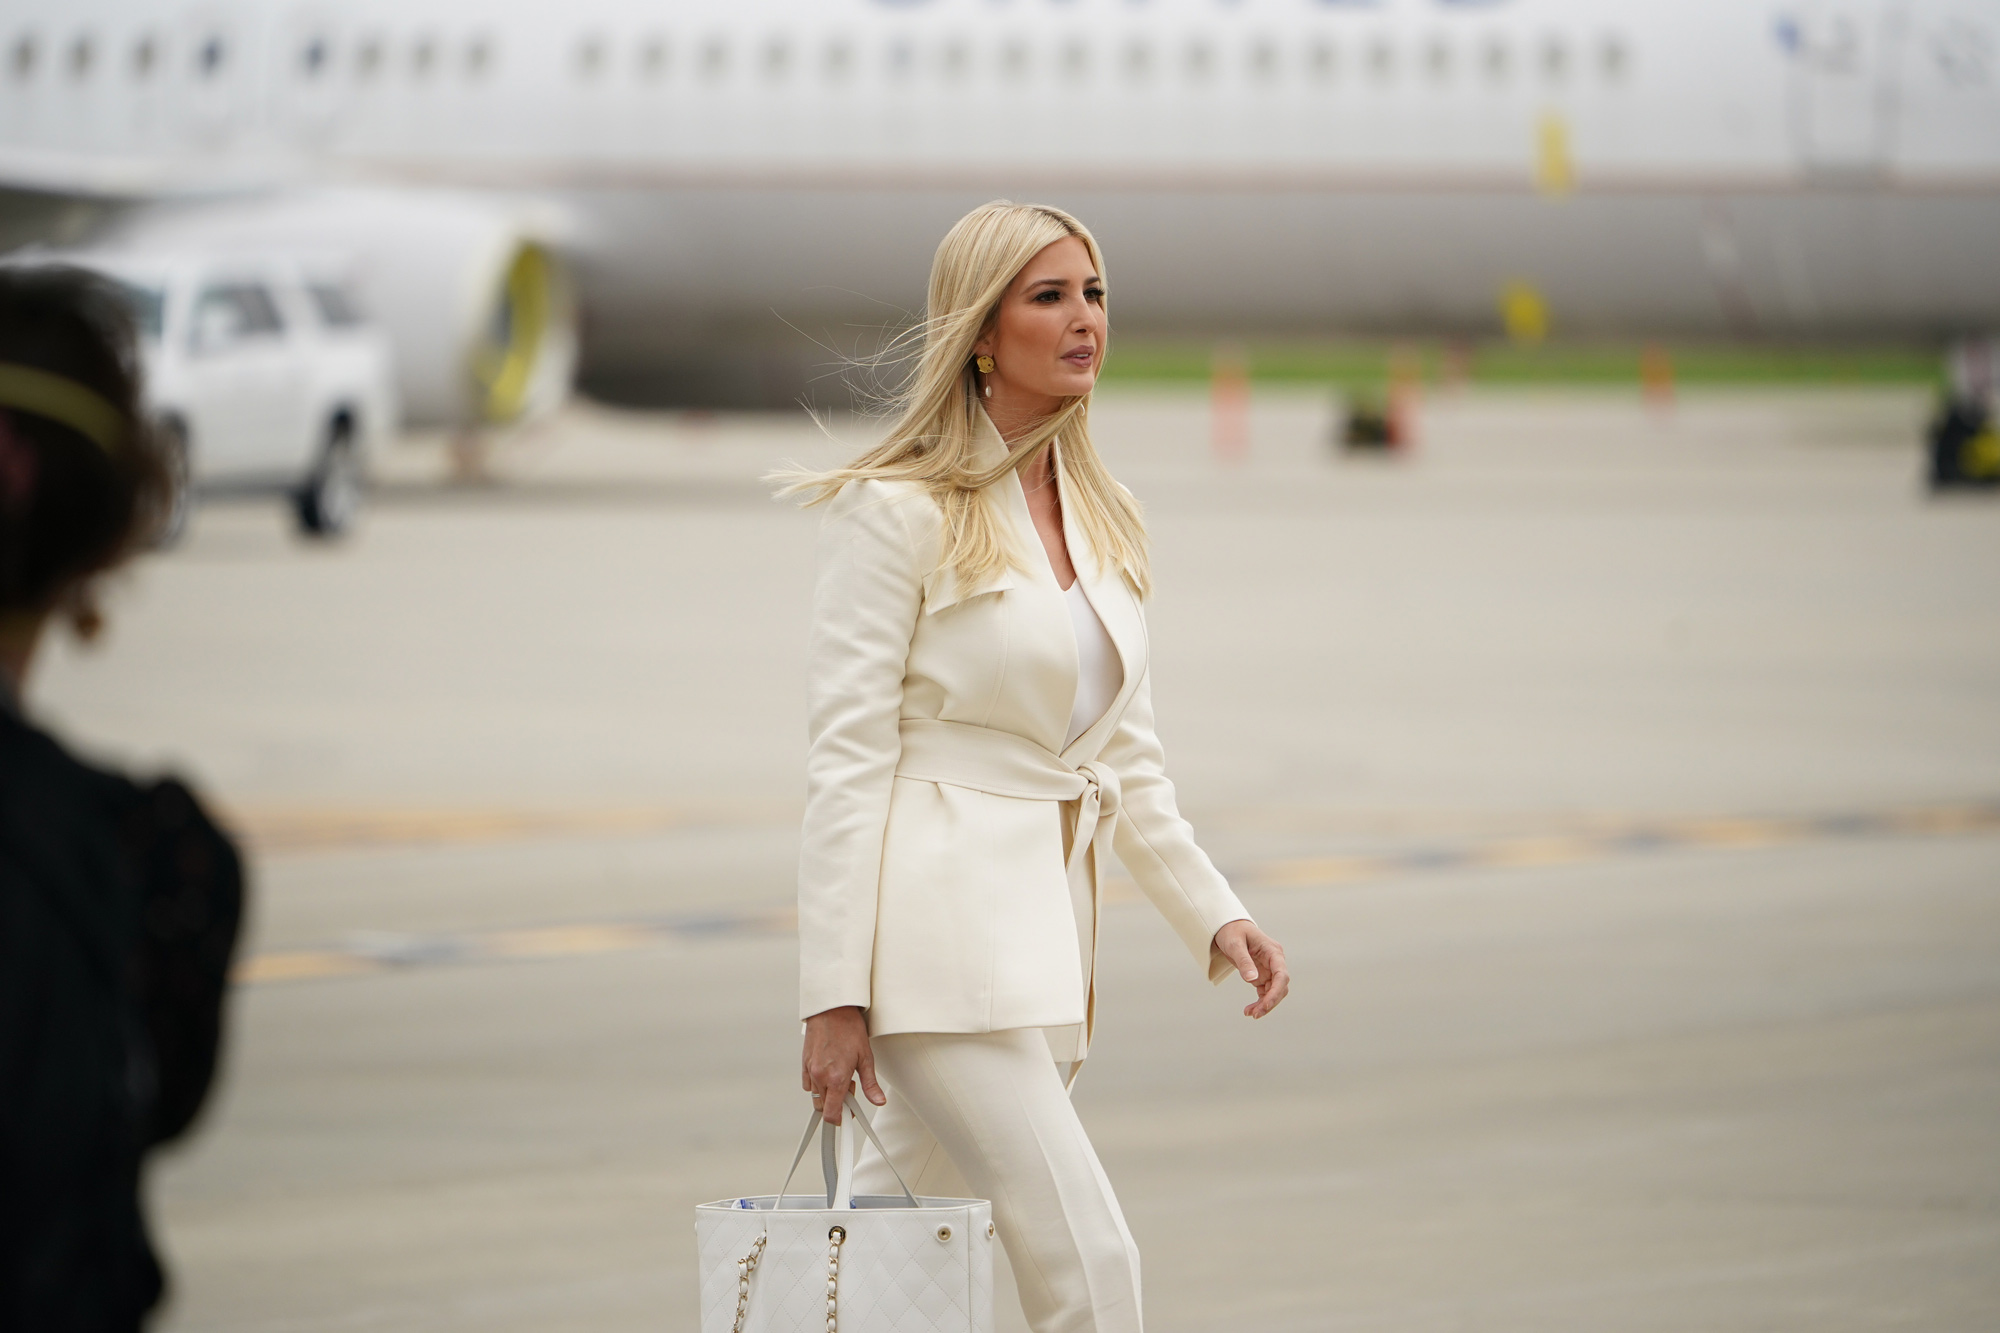 Advisor to the President Ivanka Trump arrives at Cleveland Hopkins International Airport in Cleveland, Ohio on September 29.